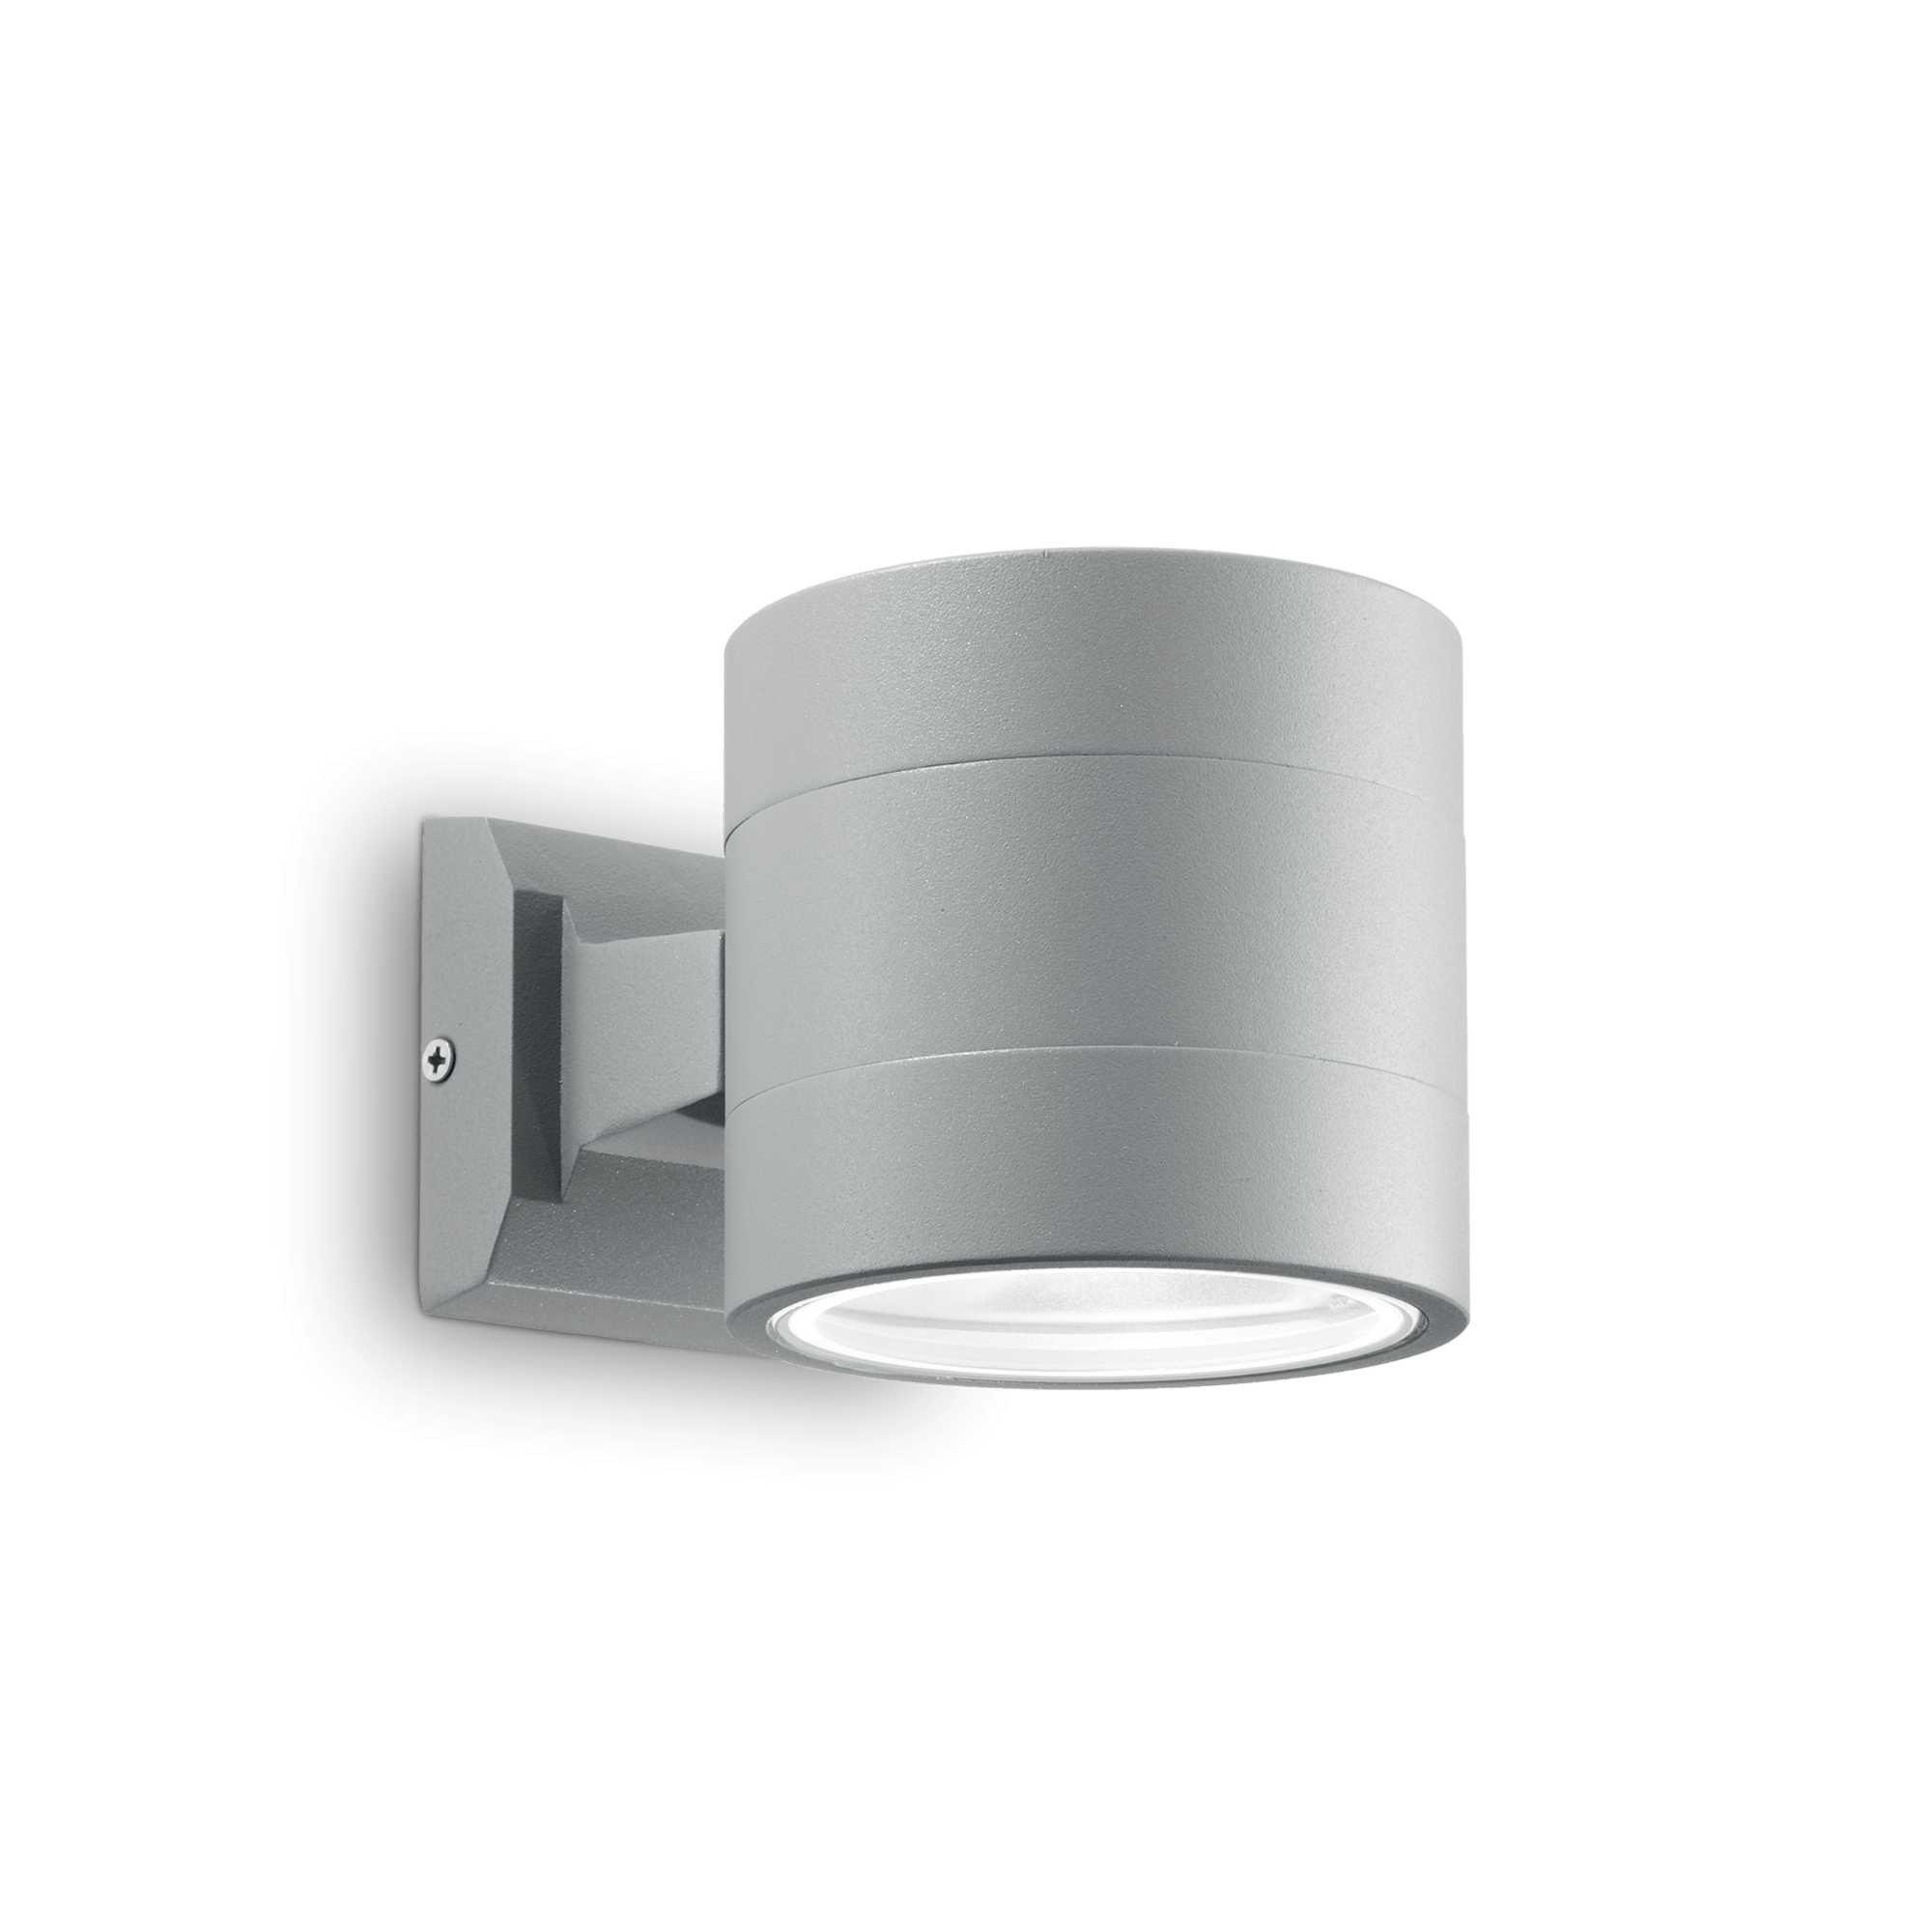 Snif Round 1 Light Outdoor Up Down Wall Light White Grey IP54 G9